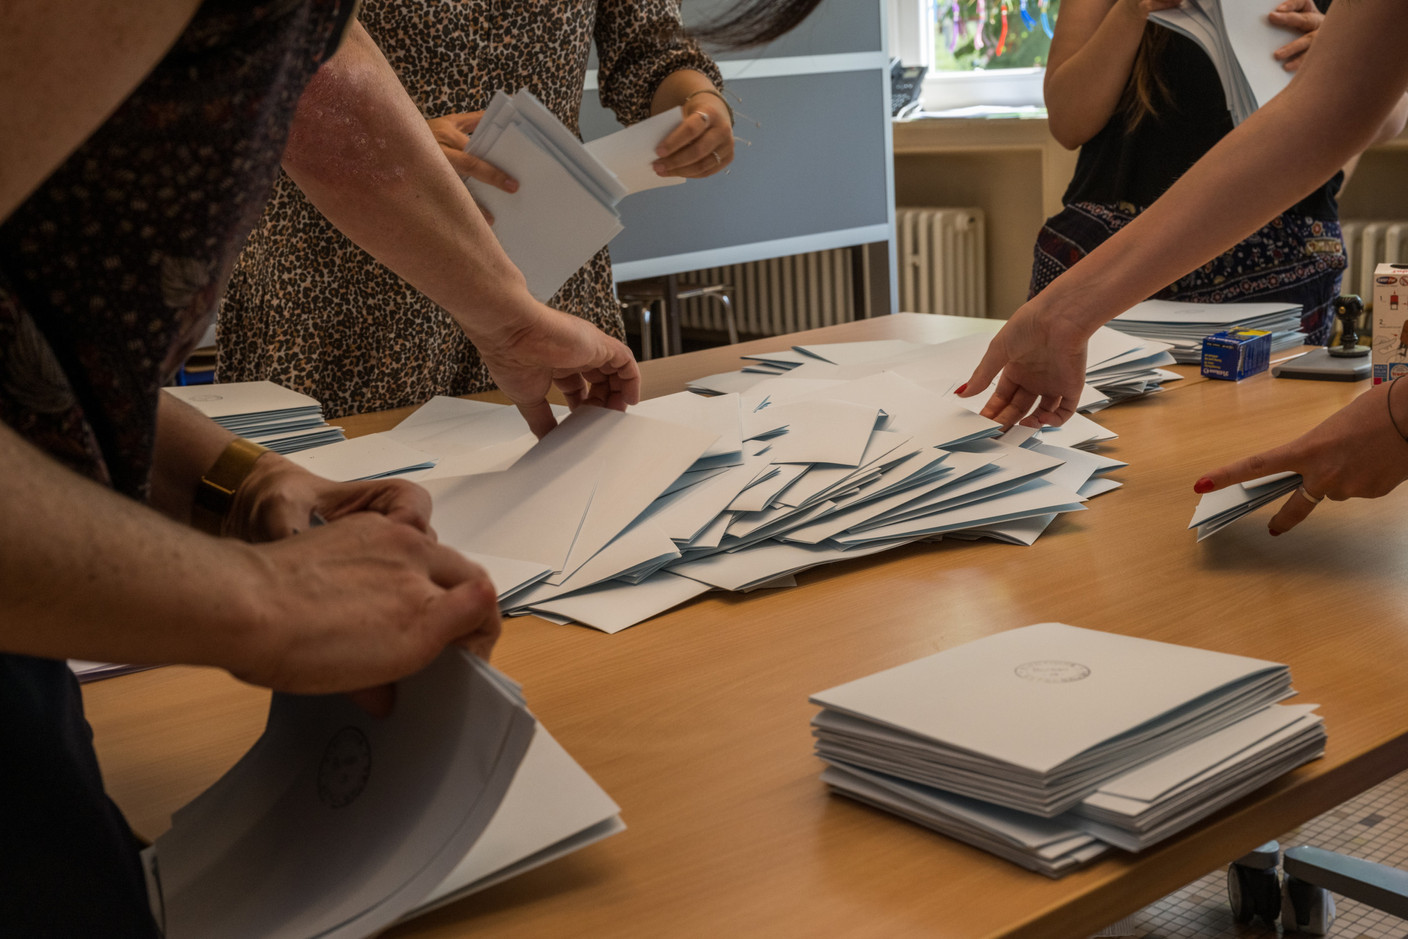 Election workers are seen counting ballots in Ettelbruck, 11 June 2023. Photo: Nader Ghavami